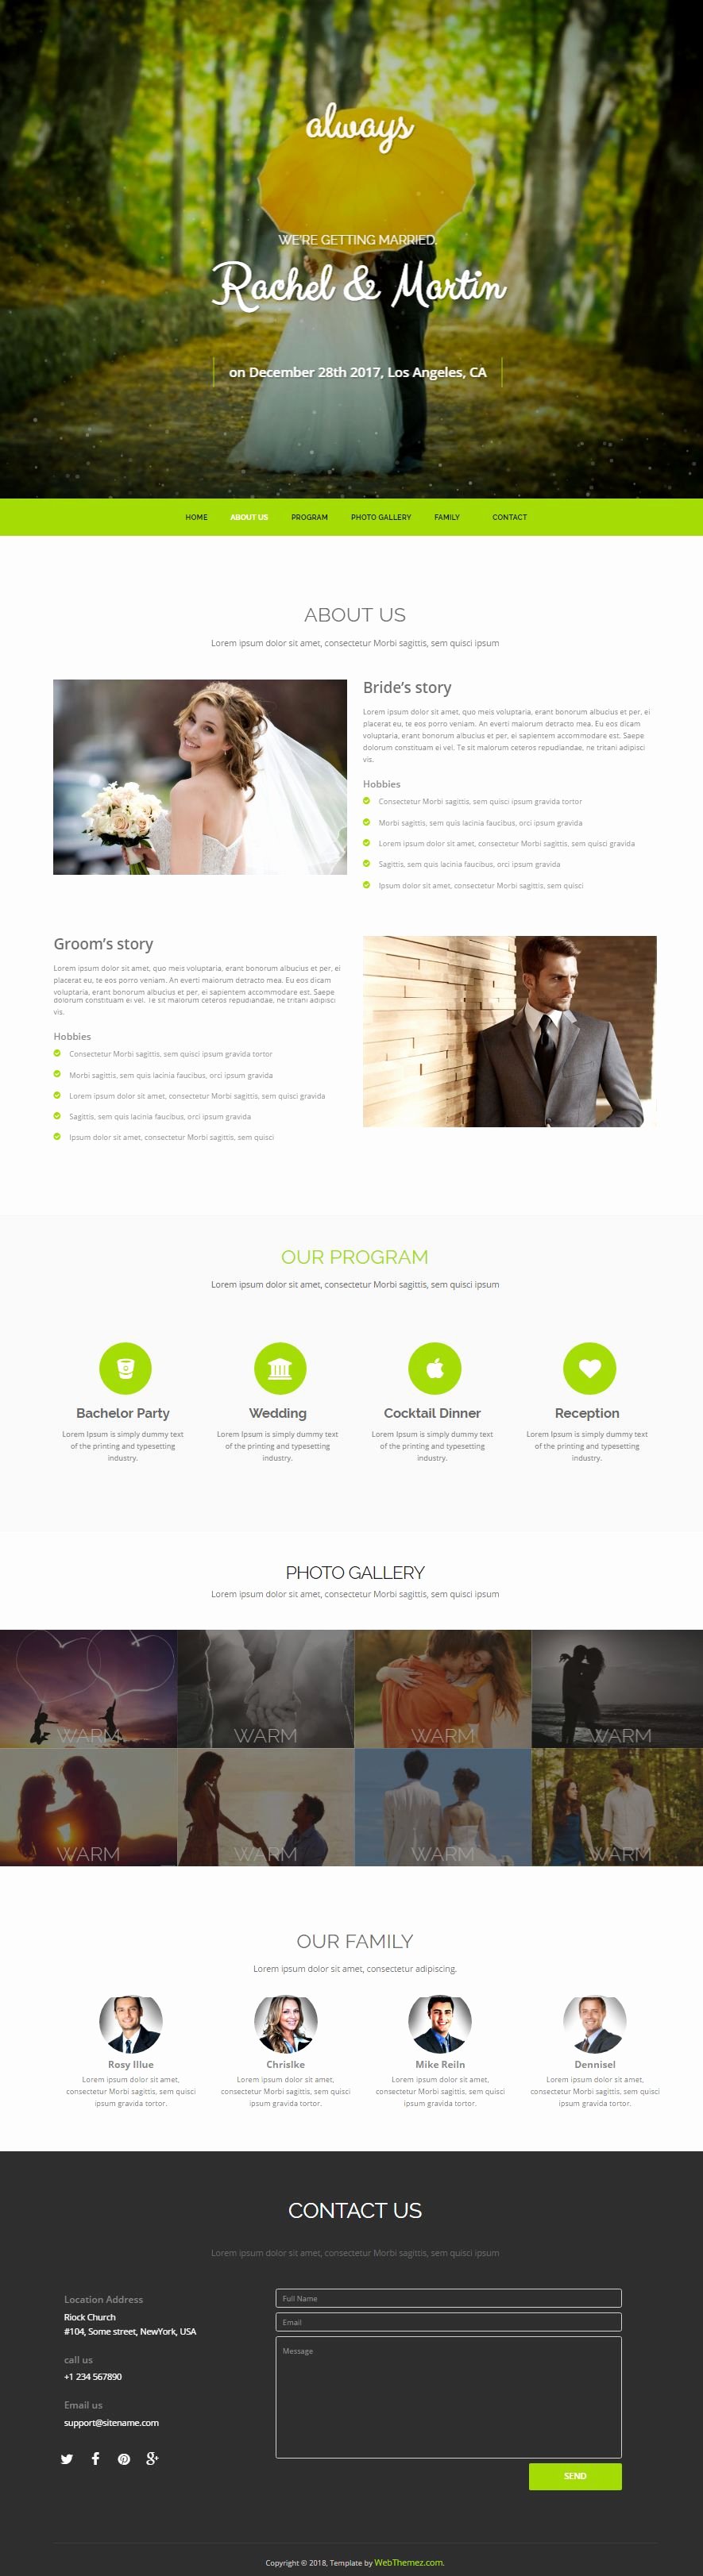 Wedding Web Template Free Beautiful HTML Bootstrap Wedding Website Template Free Download